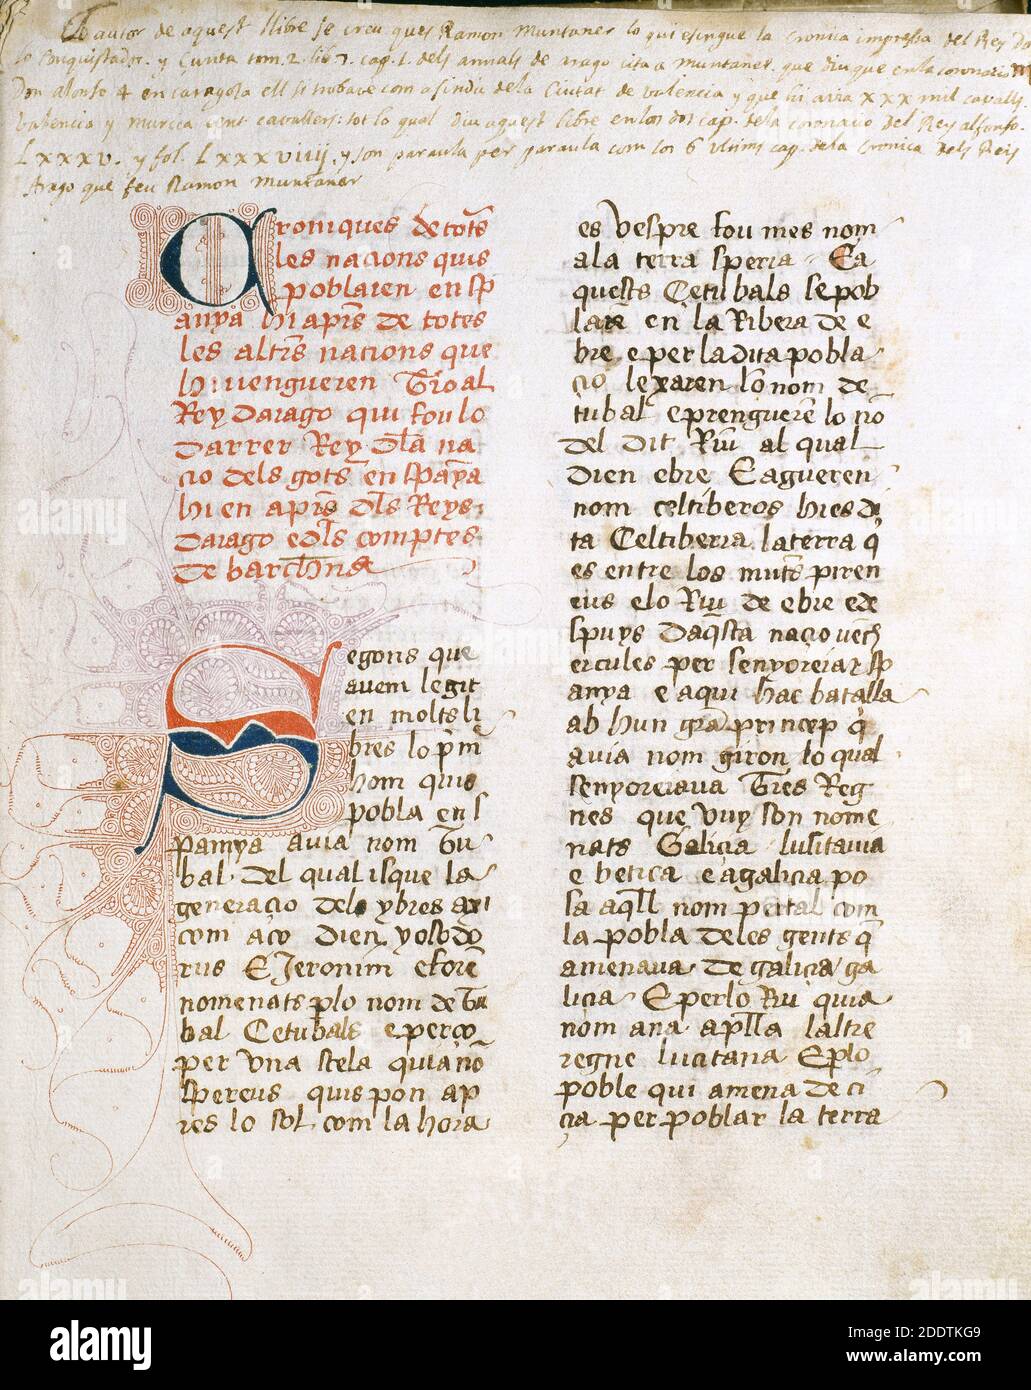 Ramon Muntaner (1265-1336). Catalan chronicler and soldier. Chronicle, written between 1325-1328 in Xirivella (Valencia province, Spain). Folio 1. Stock Photo